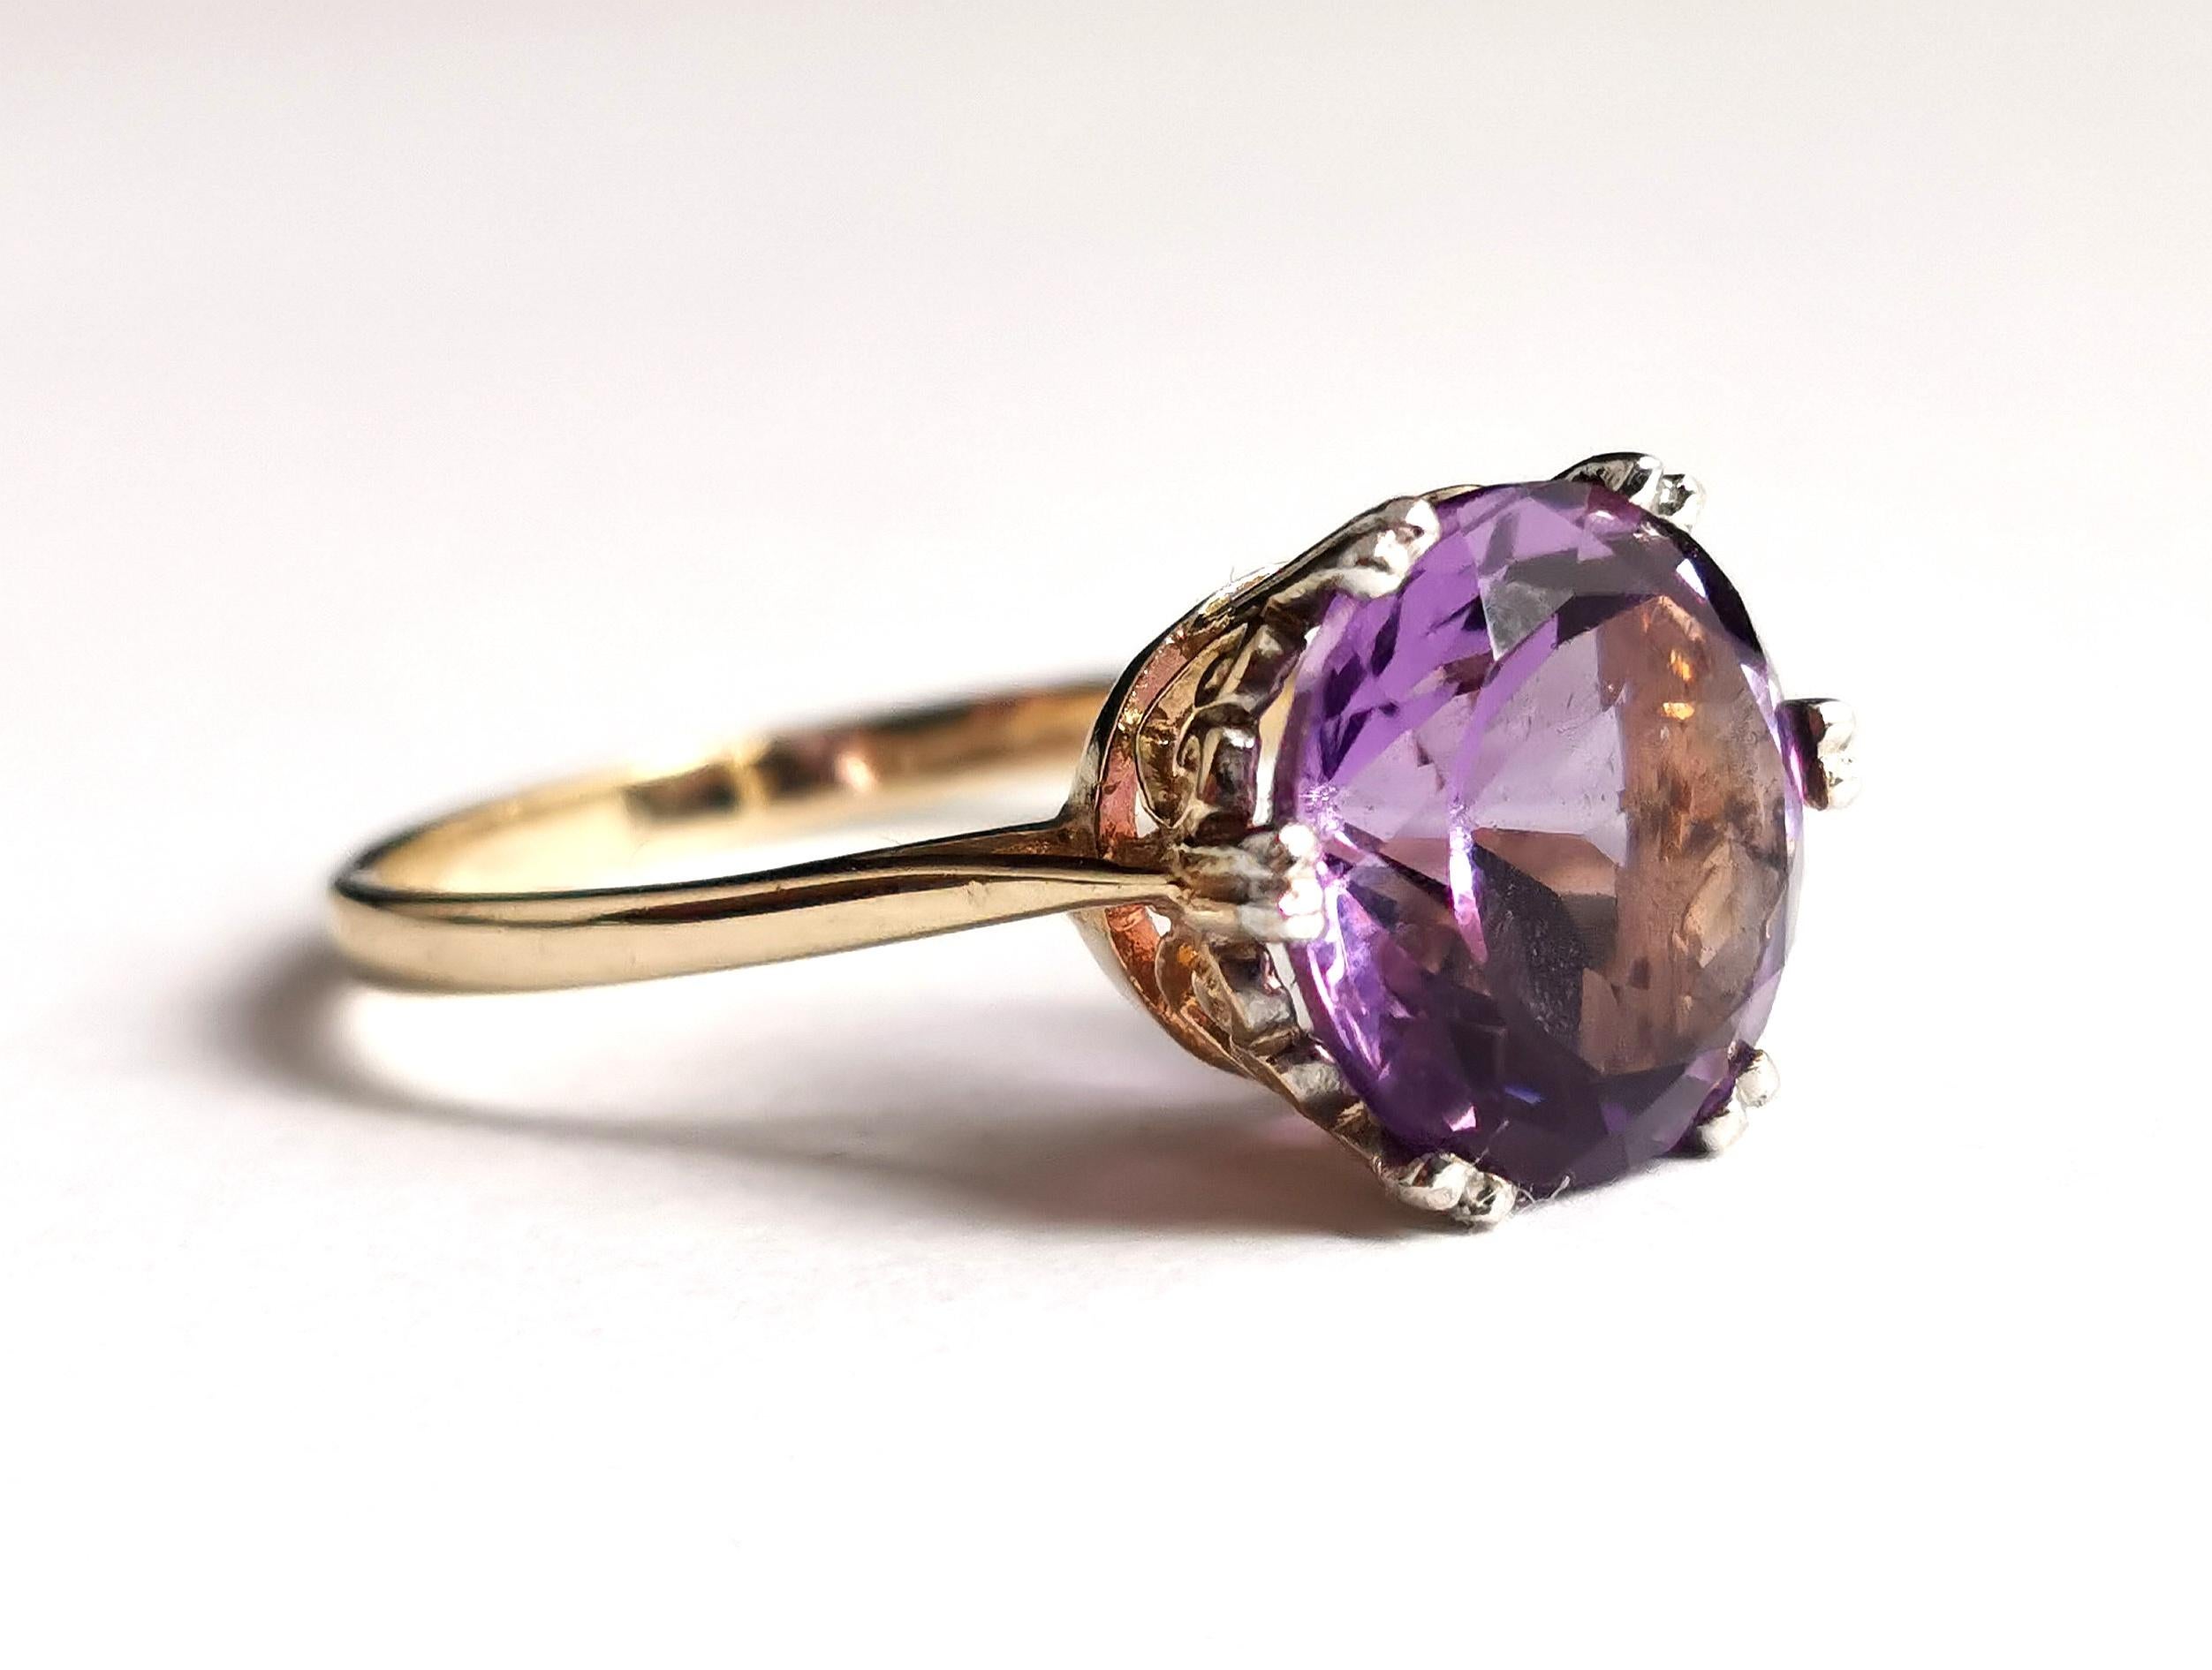 Vintage Amethyst Cocktail Ring, 9k Yellow Gold 7